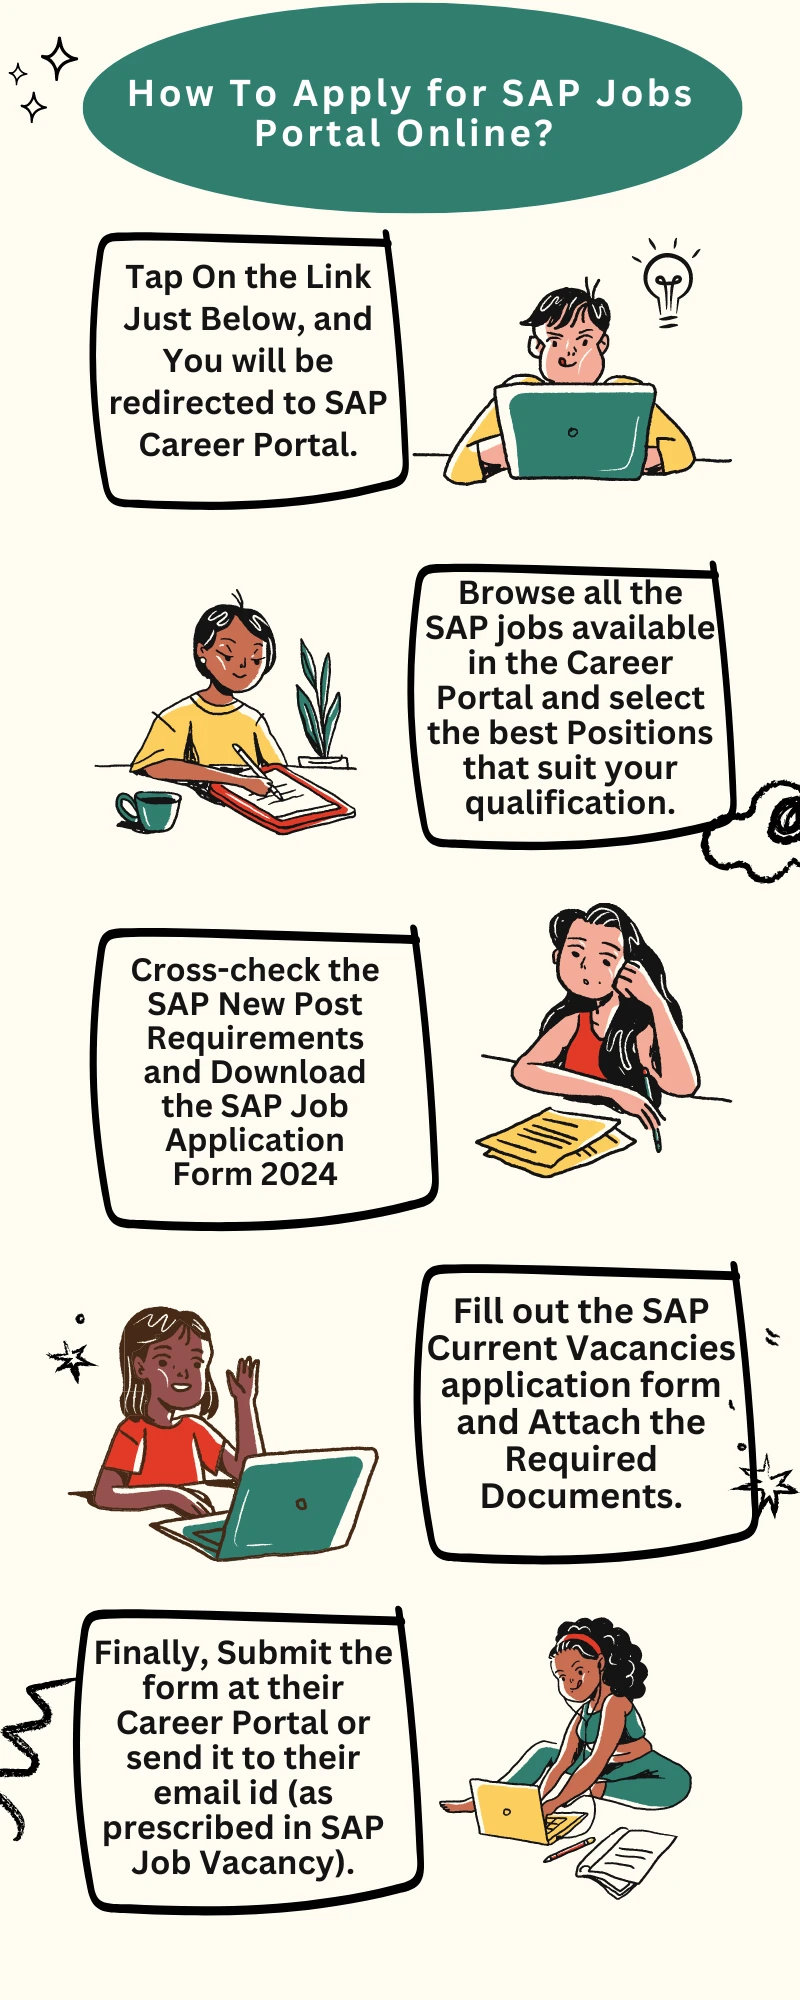 How To Apply for SAP Jobs Portal Online? 